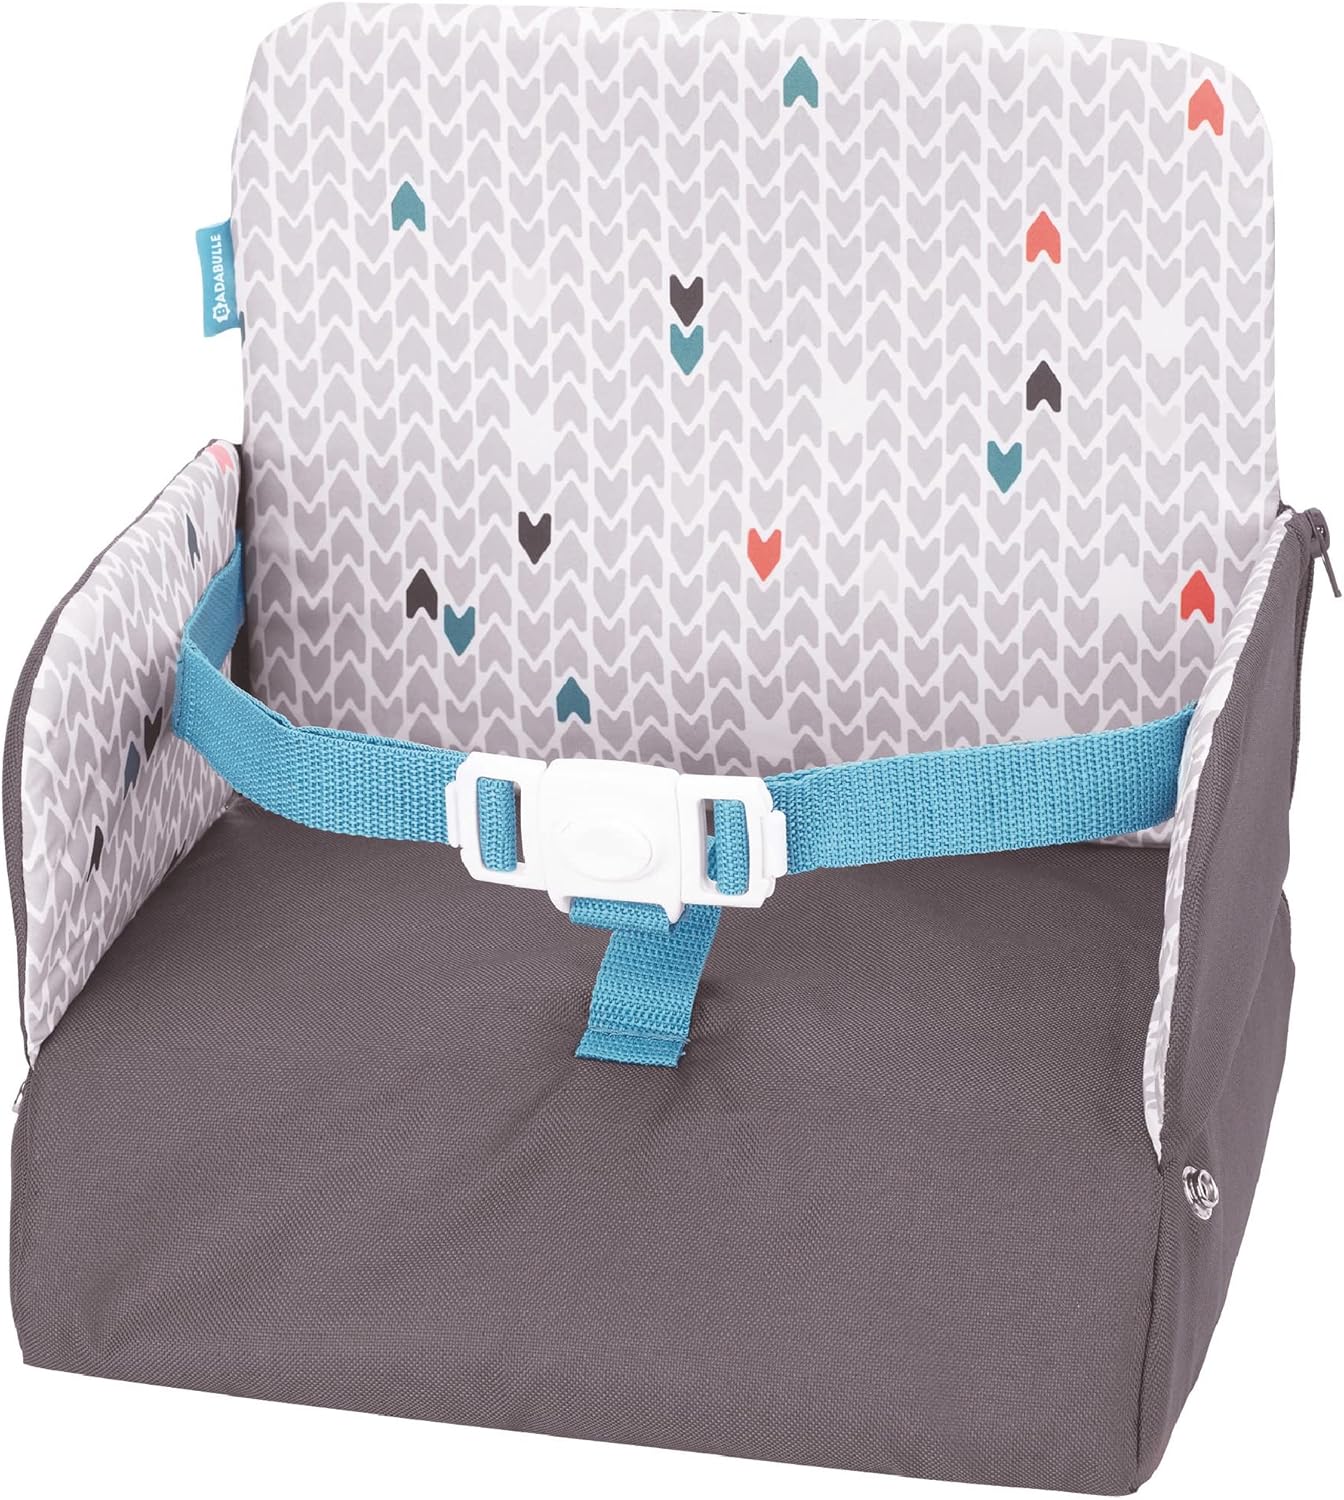 Badabulle Yummy Compact Travel Booster Seat